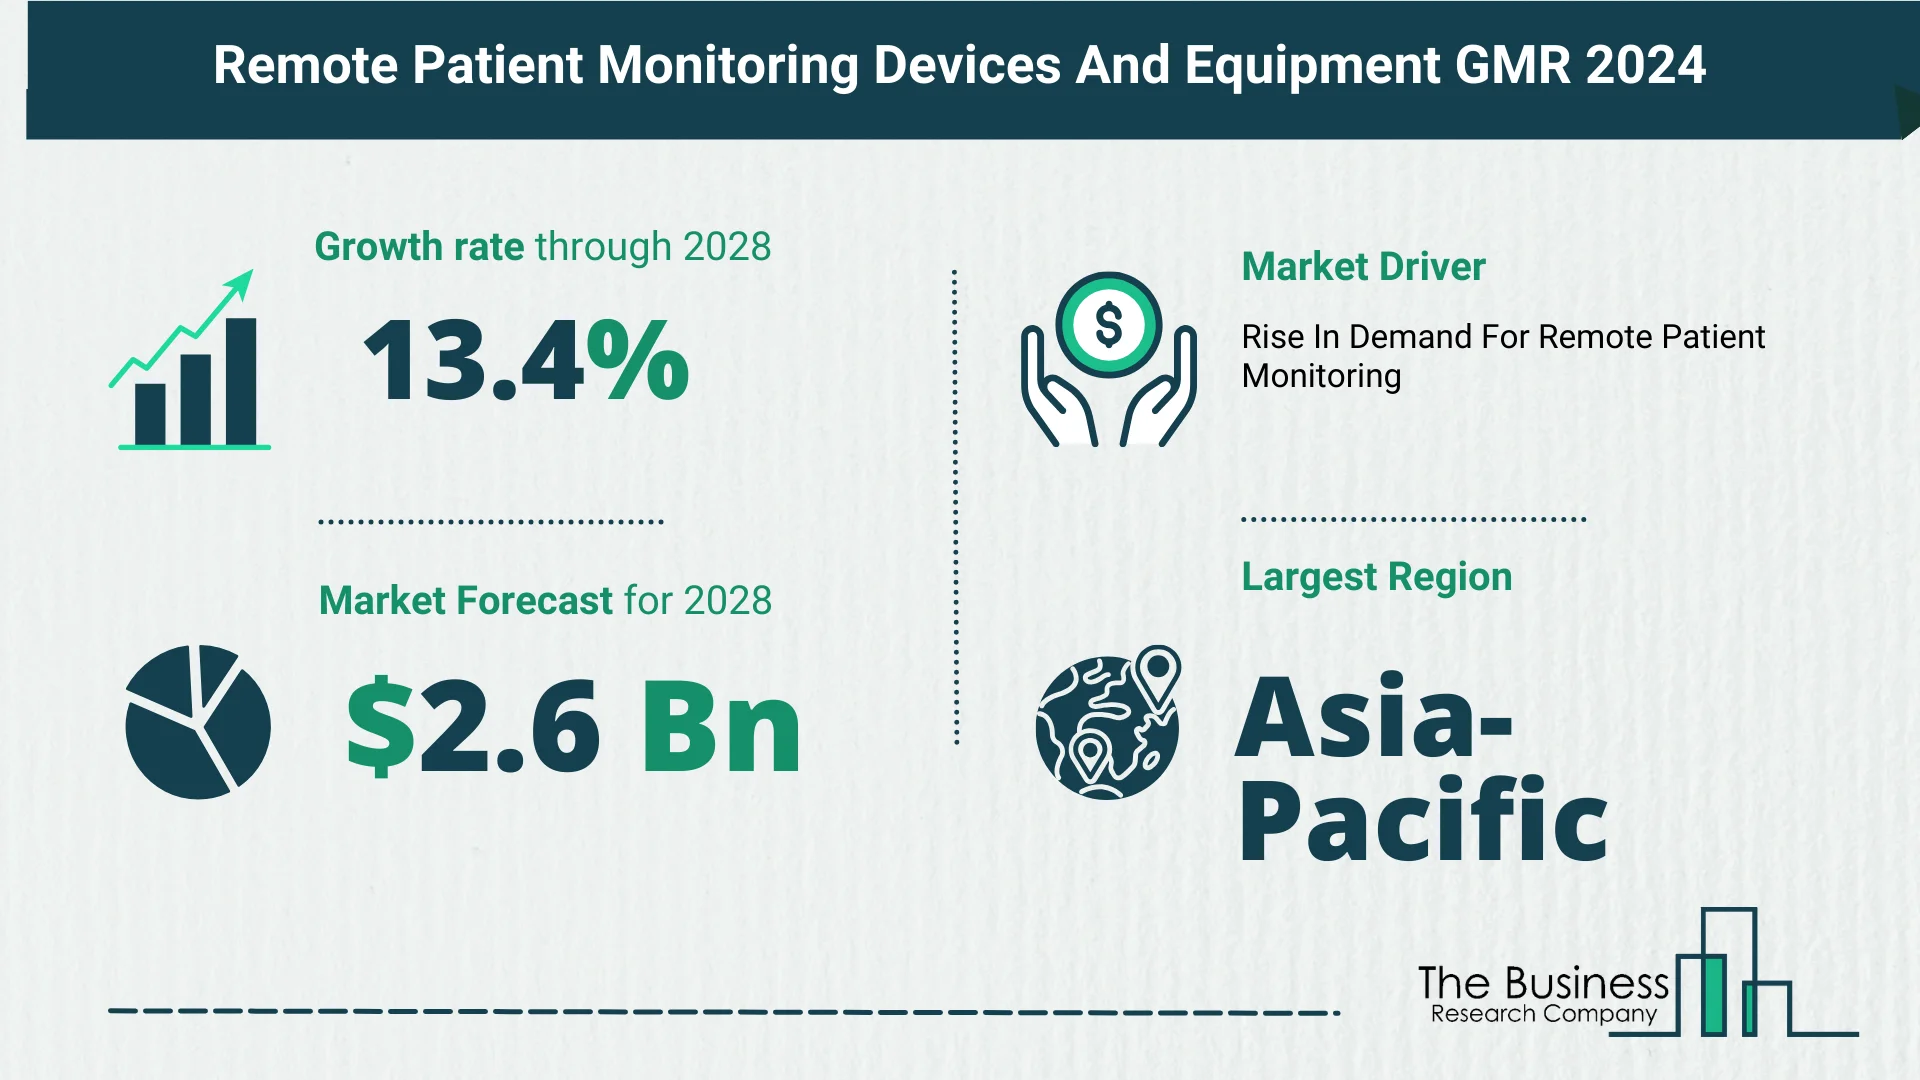 Remote Patient Monitoring Devices And Equipment